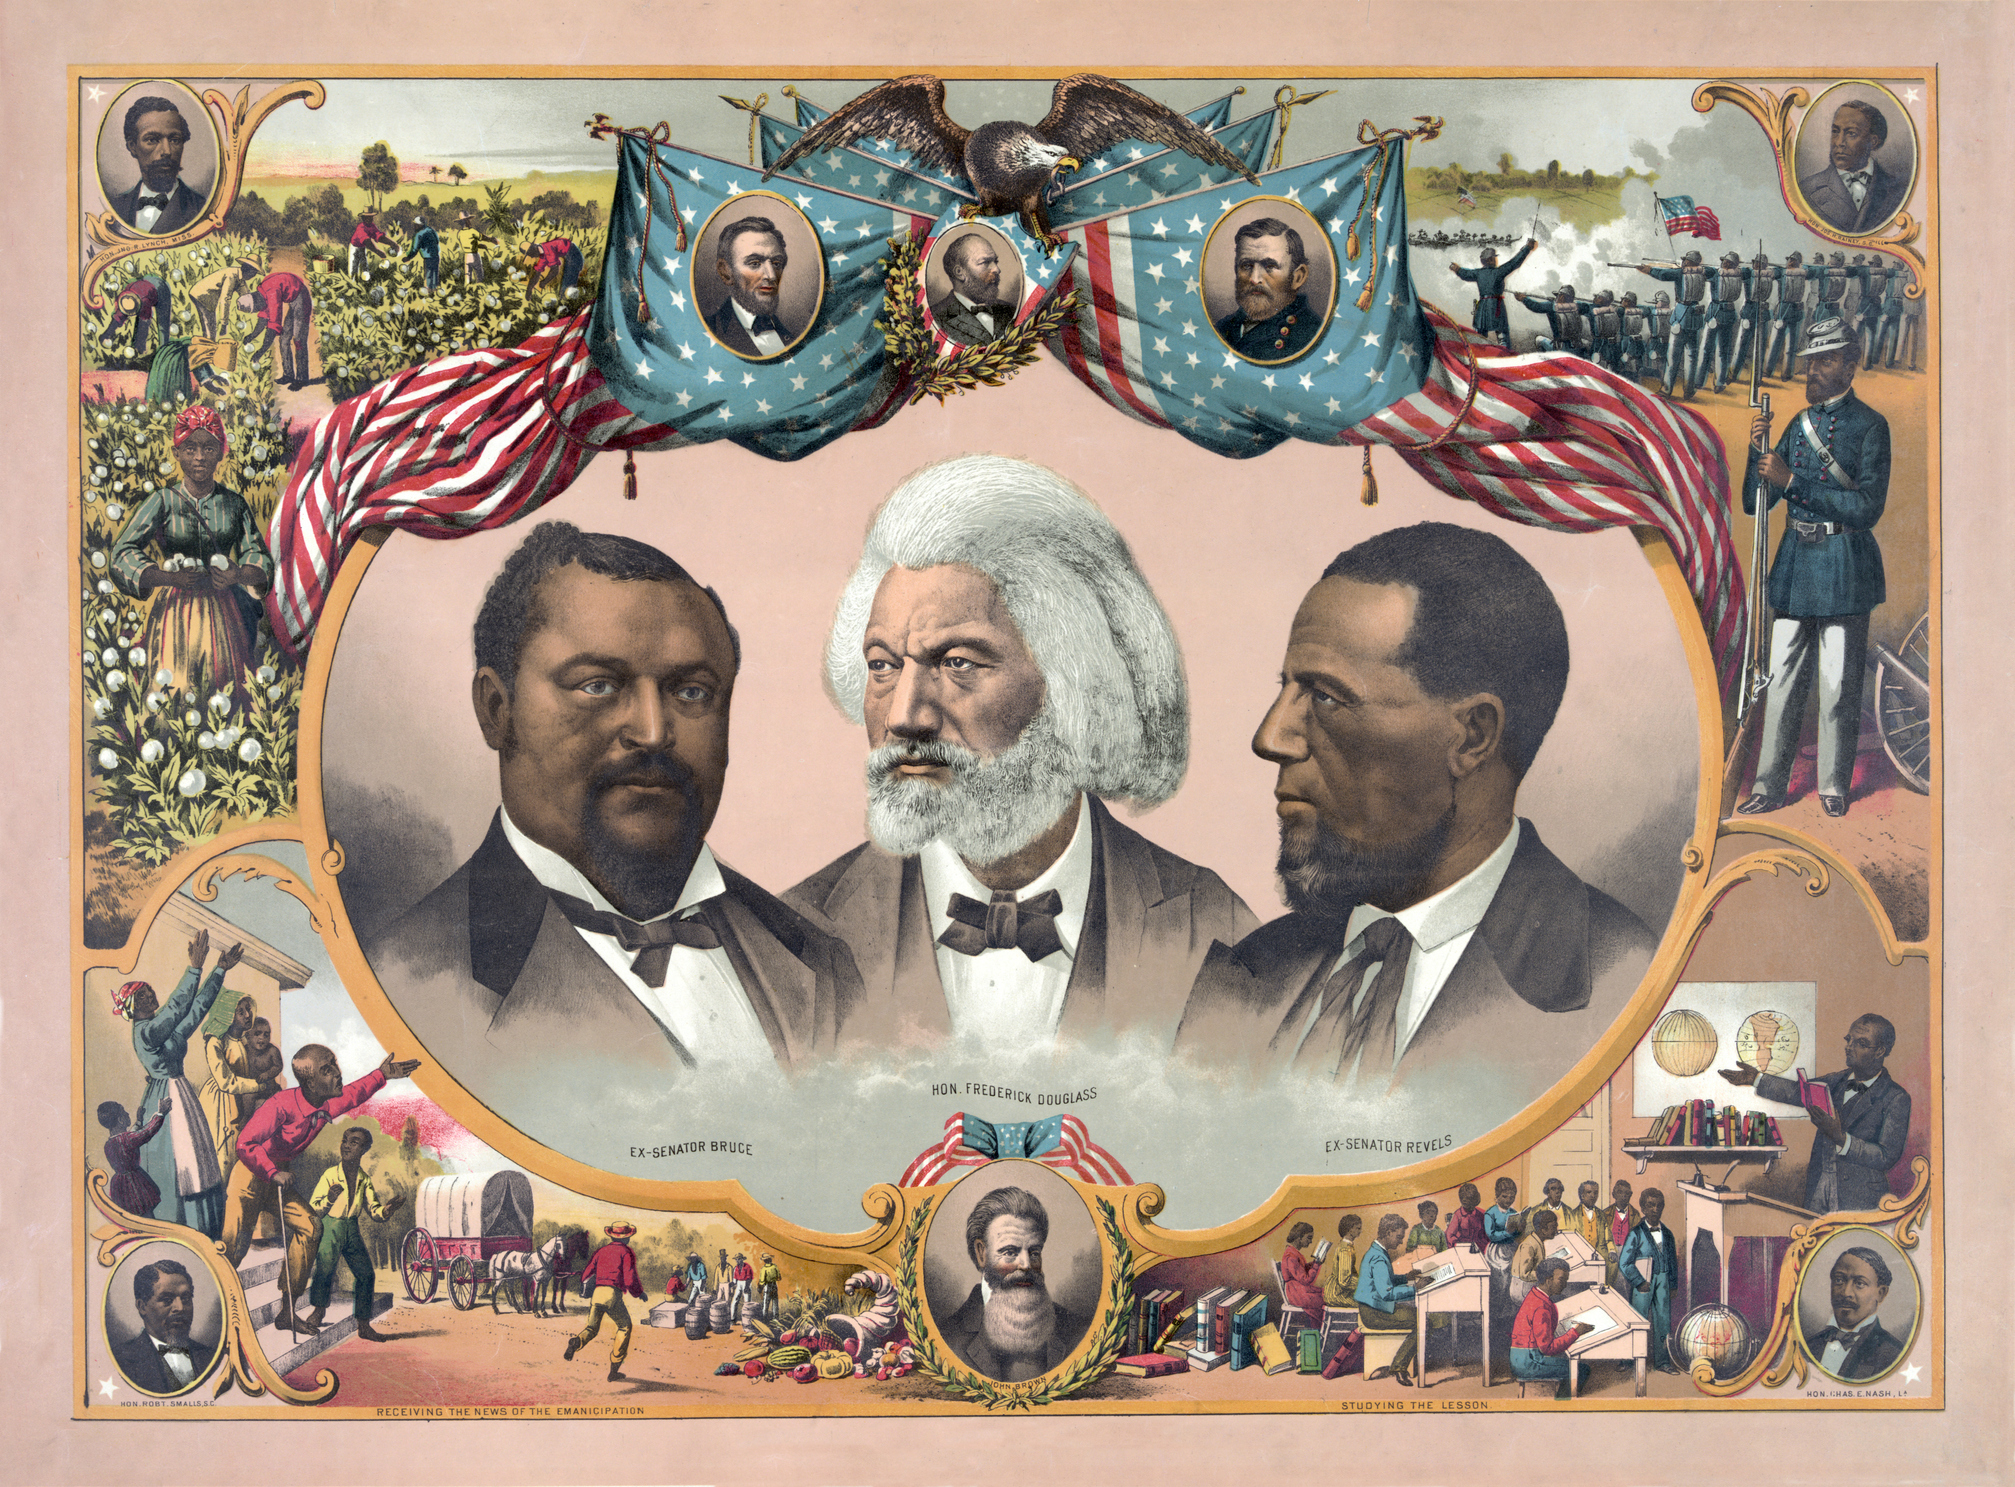 Vintage illustration features portraits of African-American heroes, including Blanche Kelso Bruce, Frederick Douglass, and Hiram Rhodes Revels, surrounded by scenes of African-American life in the mid 1800s and portraits of Abraham Lincoln, James A. Garfield, and Ulysses S. Grant. (Getty Images)